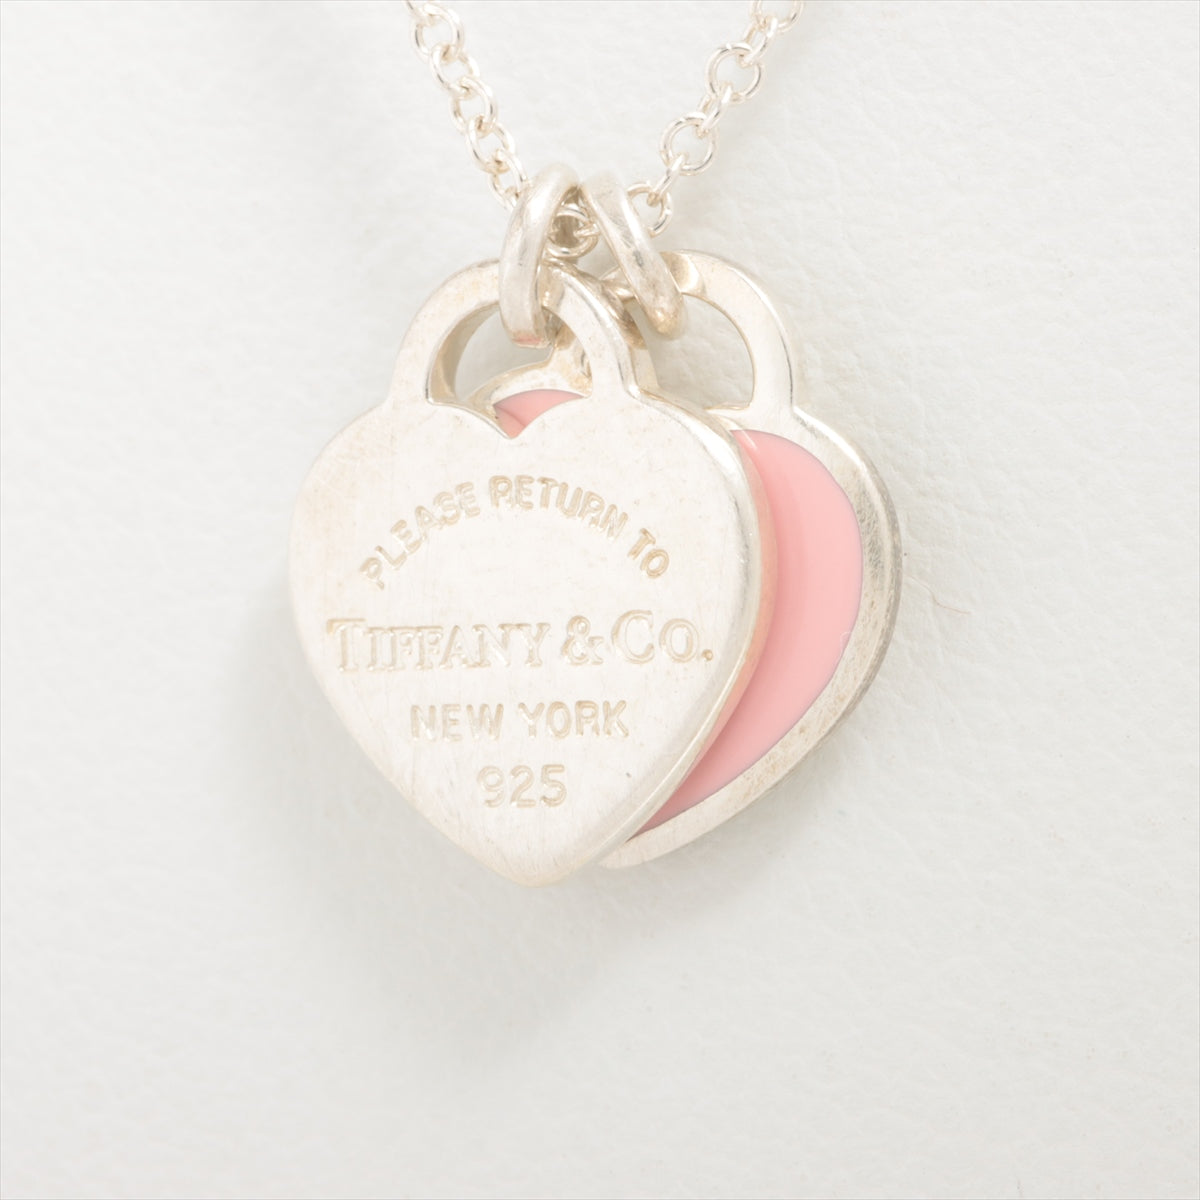 Tiffany & Co. | Pink Gold Sterling Silver Double Hearts Tag Necklace |  Tiffany and co jewelry, Tiffany jewelry, Heart key pendant